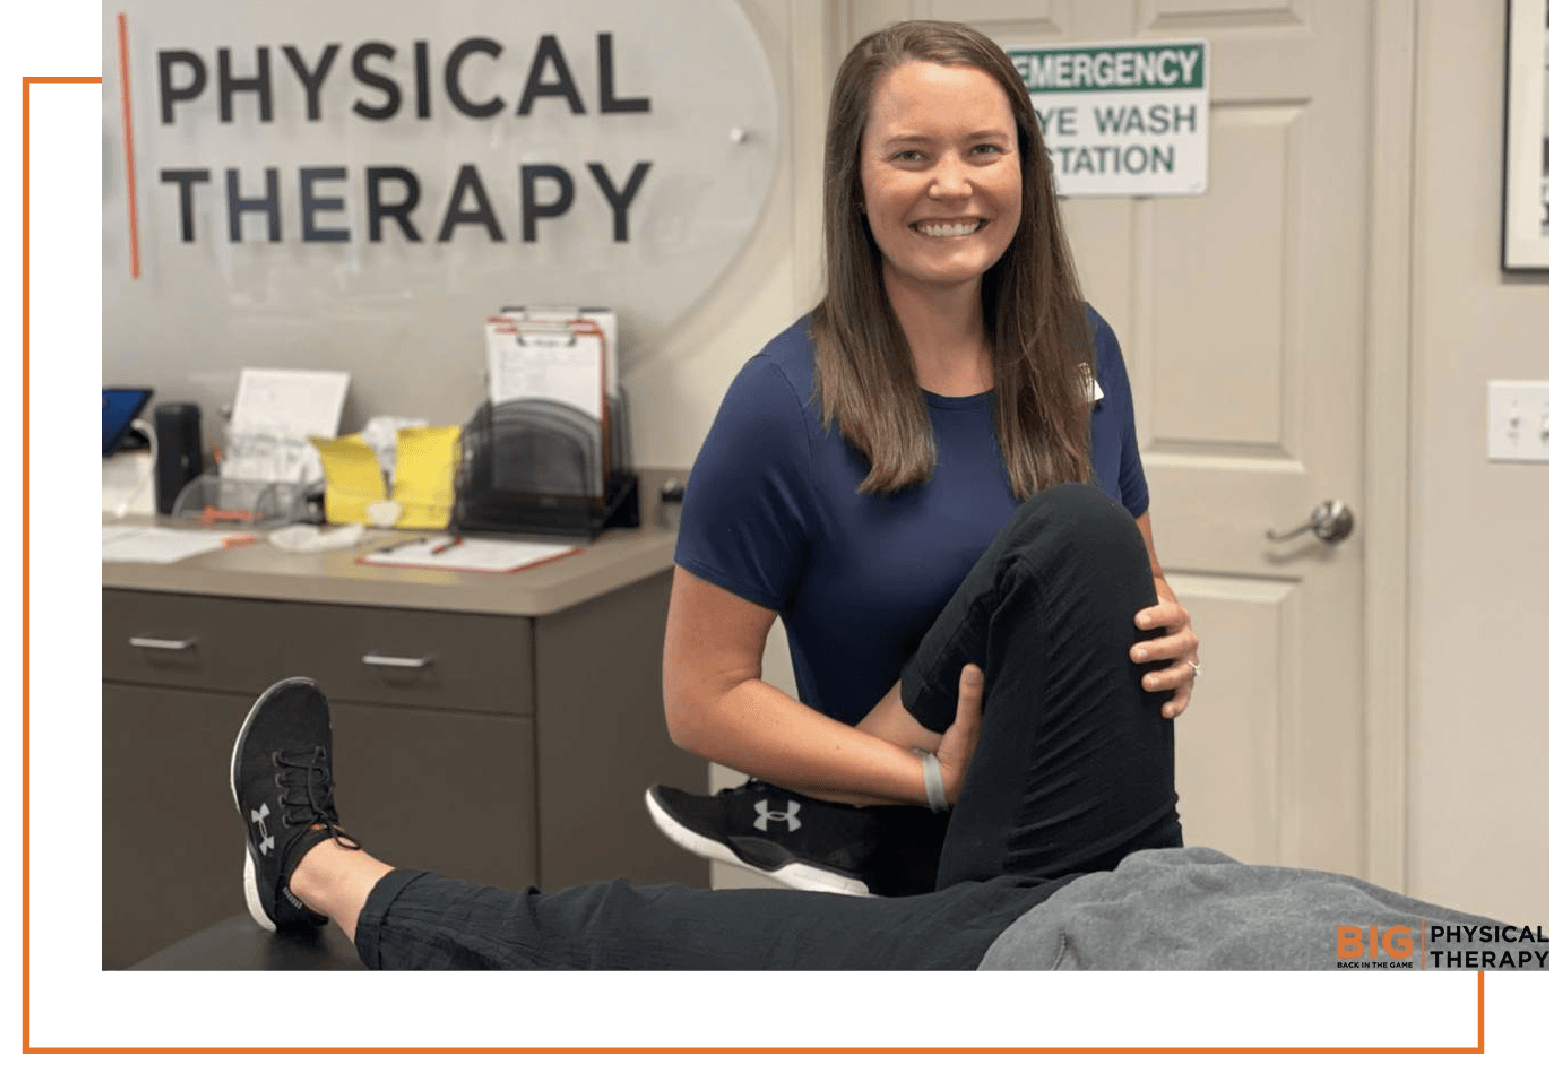 physical therapy for knee pain taking place in office